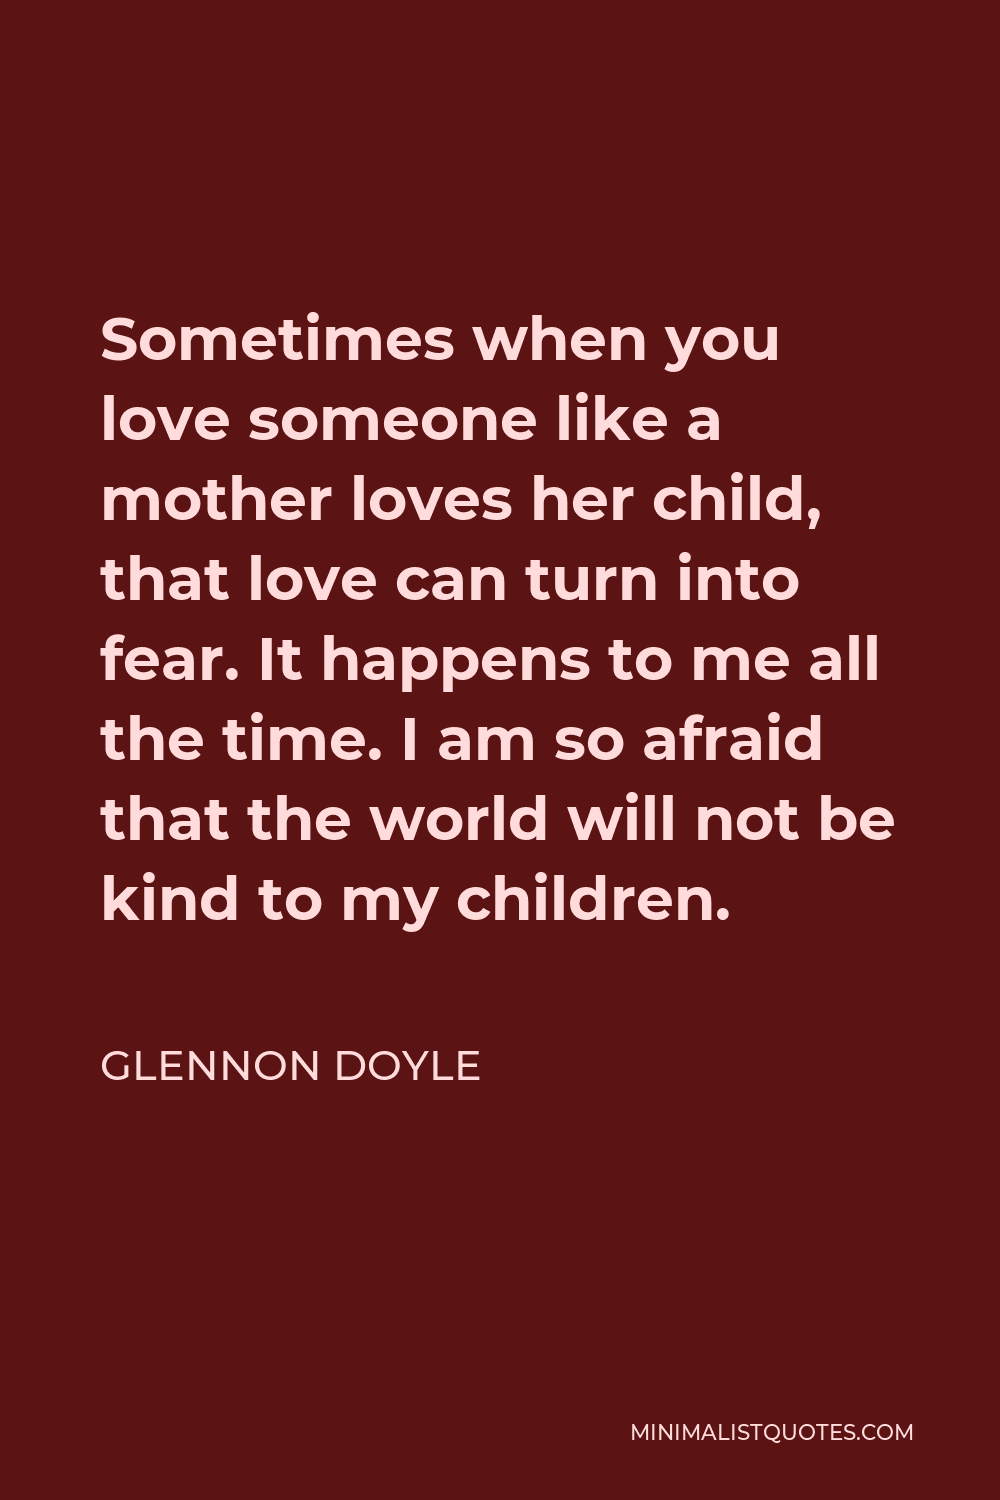 Glennon Doyle Quote - Sometimes when you love someone like a mother loves her child, that love can turn into fear. It happens to me all the time. I am so afraid that the world will not be kind to my children.